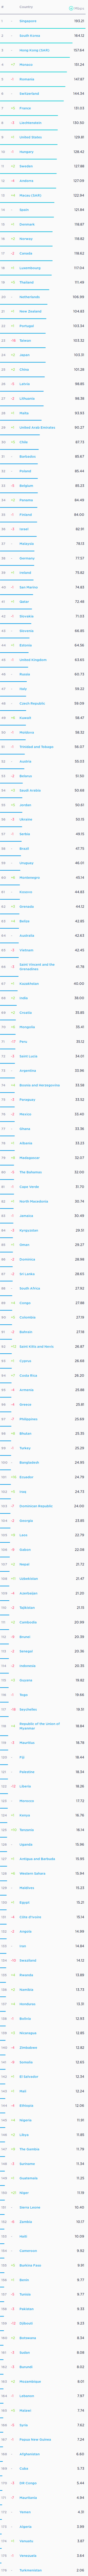 Screenshot_2020-01-13 Speedtest Global Index – Monthly comparisons of internet speeds from around the world(1).png